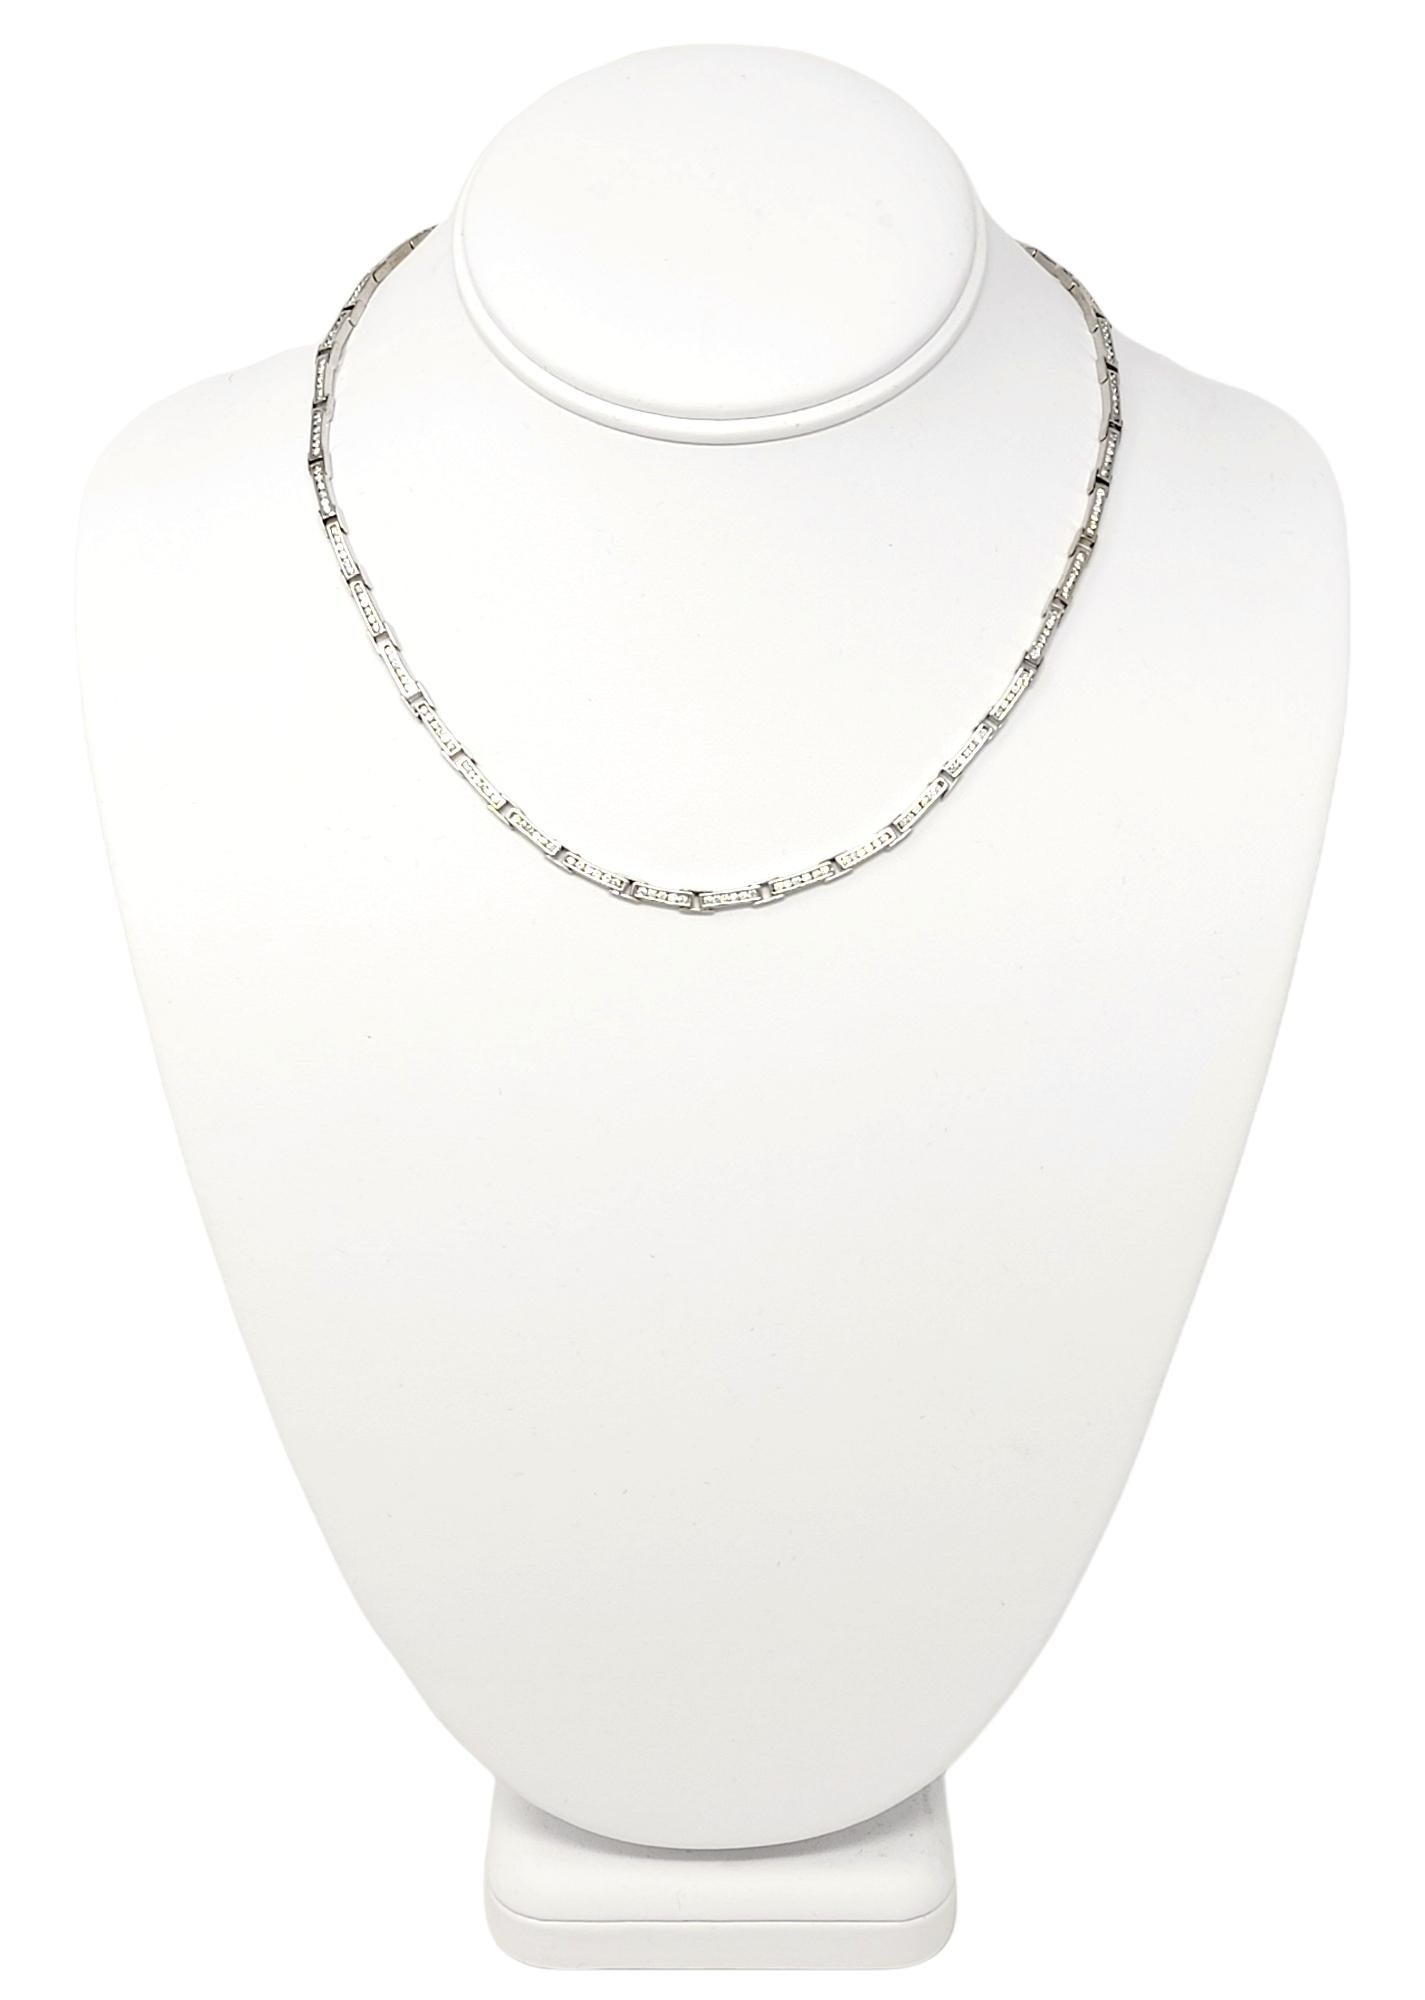 Strikingly beautiful minimalist choker style necklace. It is stunningly simple in design, with curved lines and glittering diamonds, making the piece absolutely glow! This lovely necklace features a series of solid 14 karat white gold open bar links